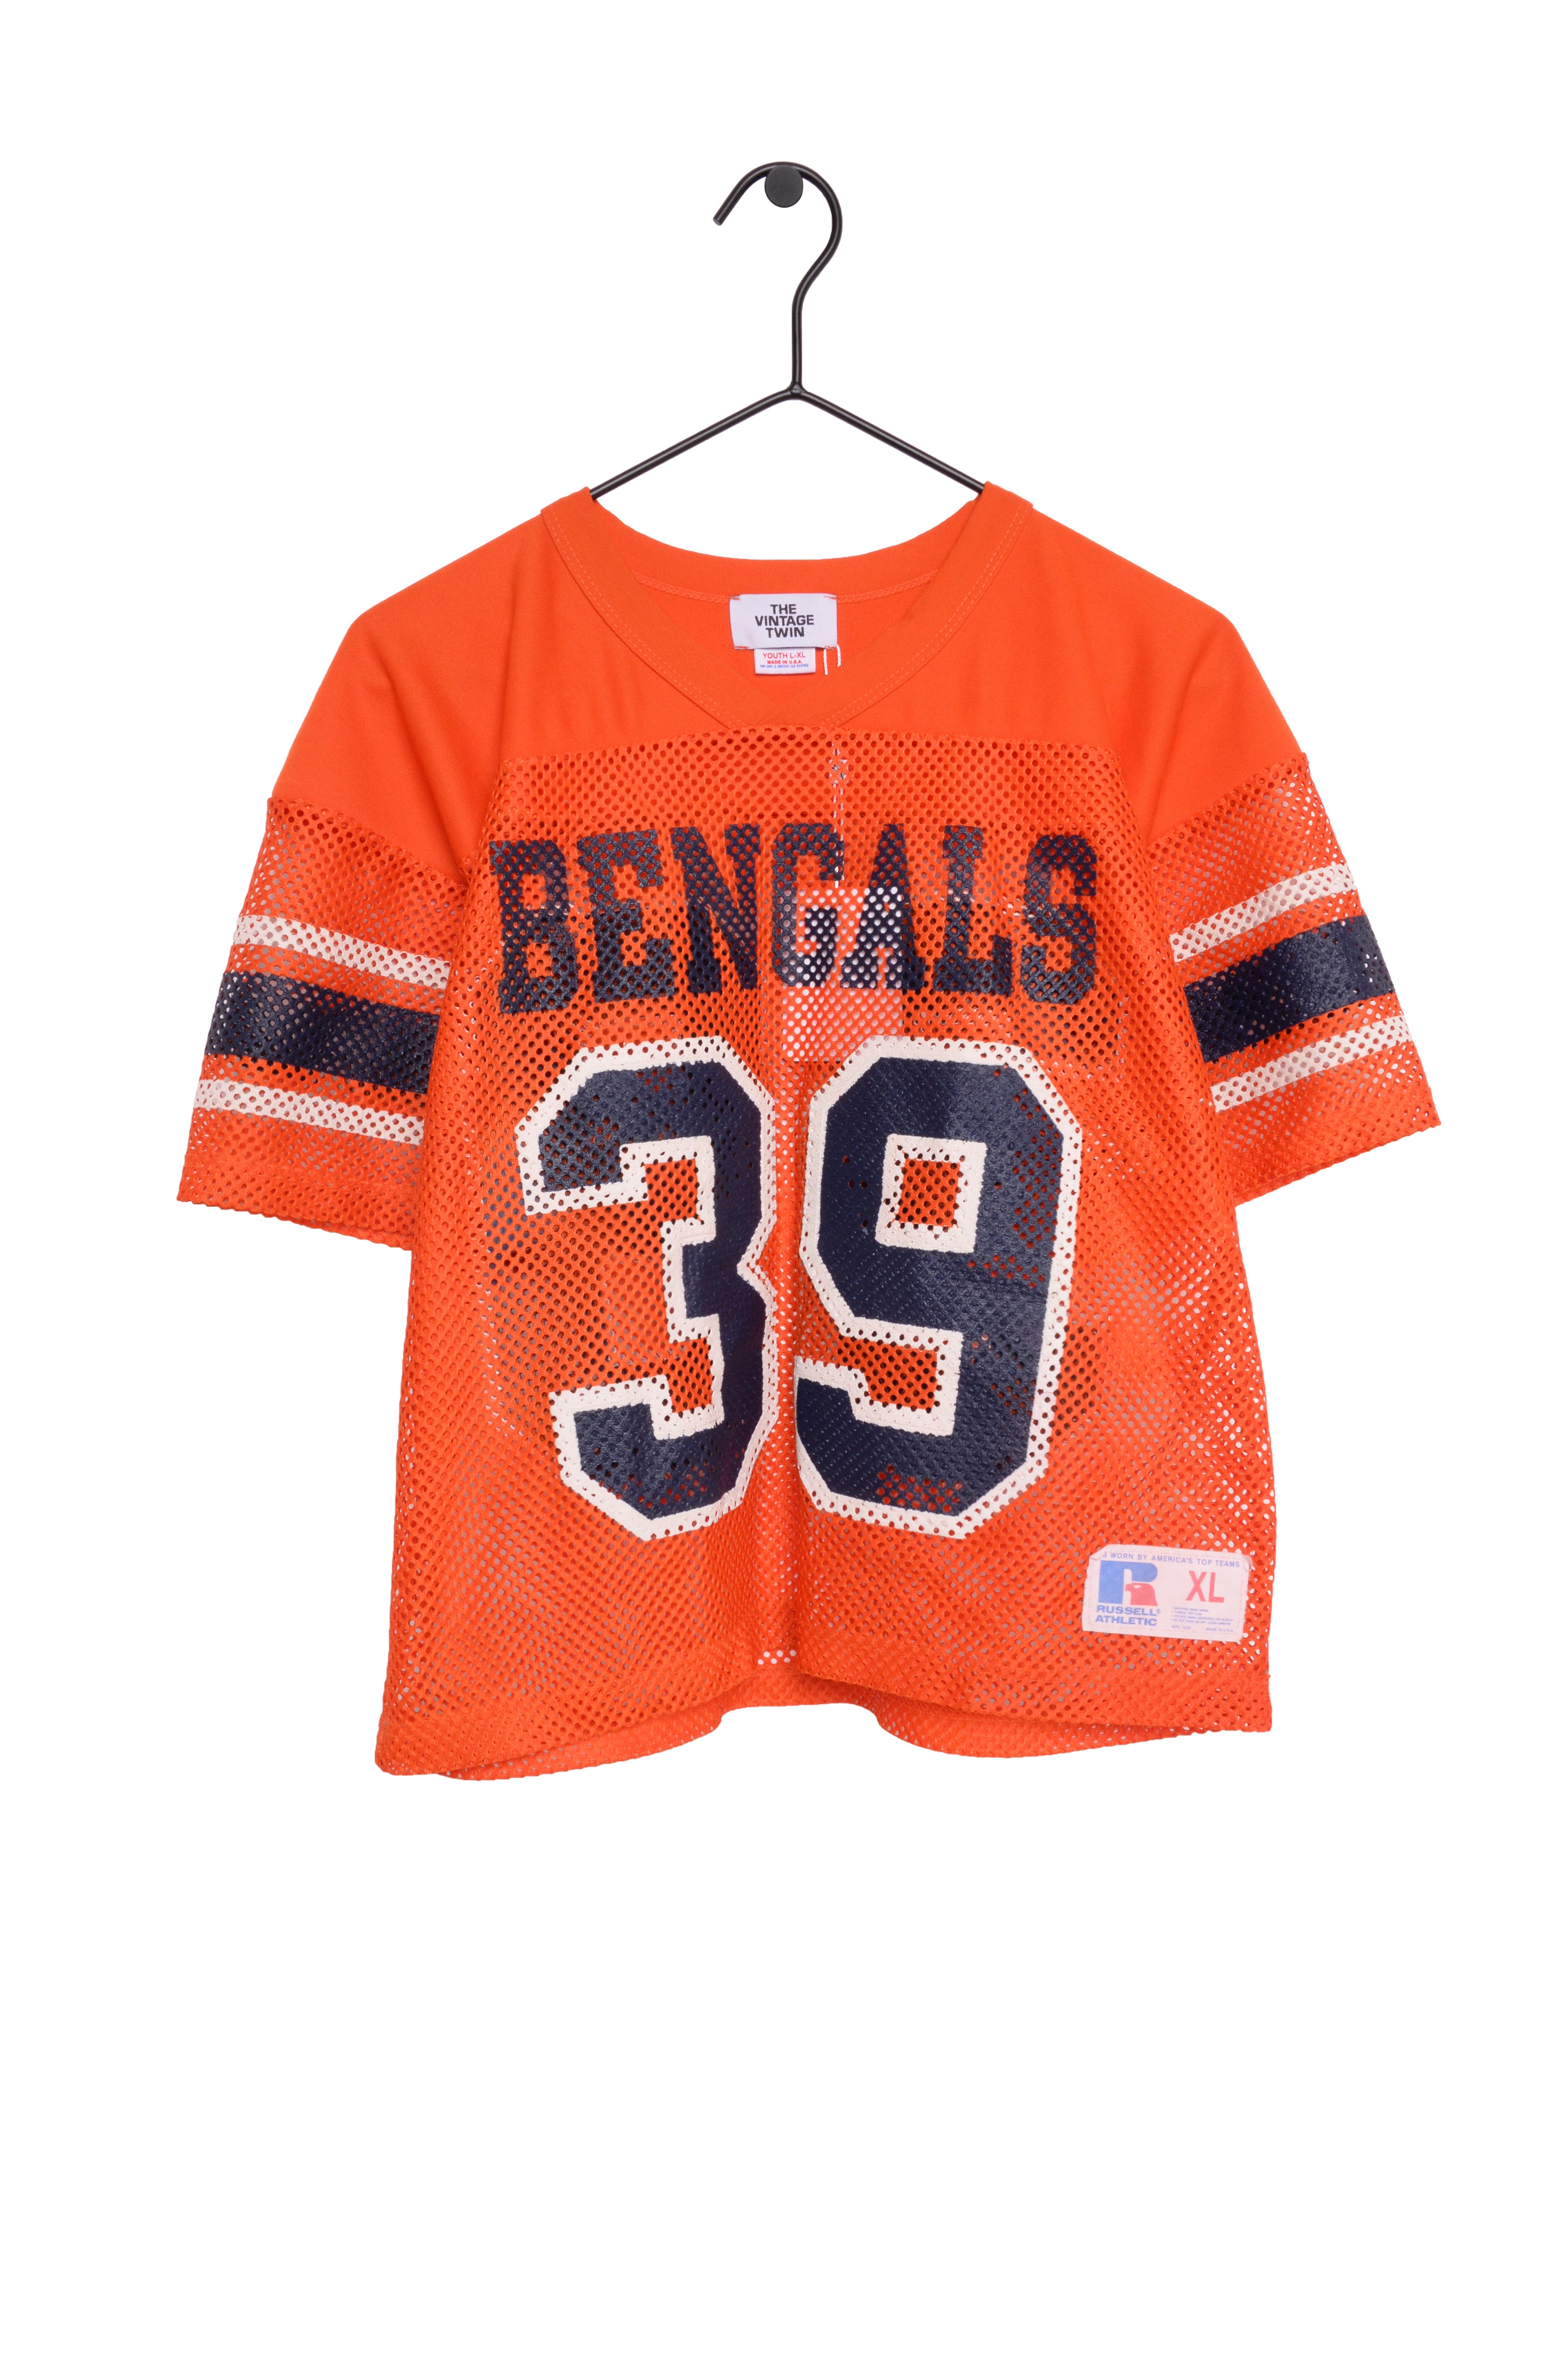 bengals youth clothing